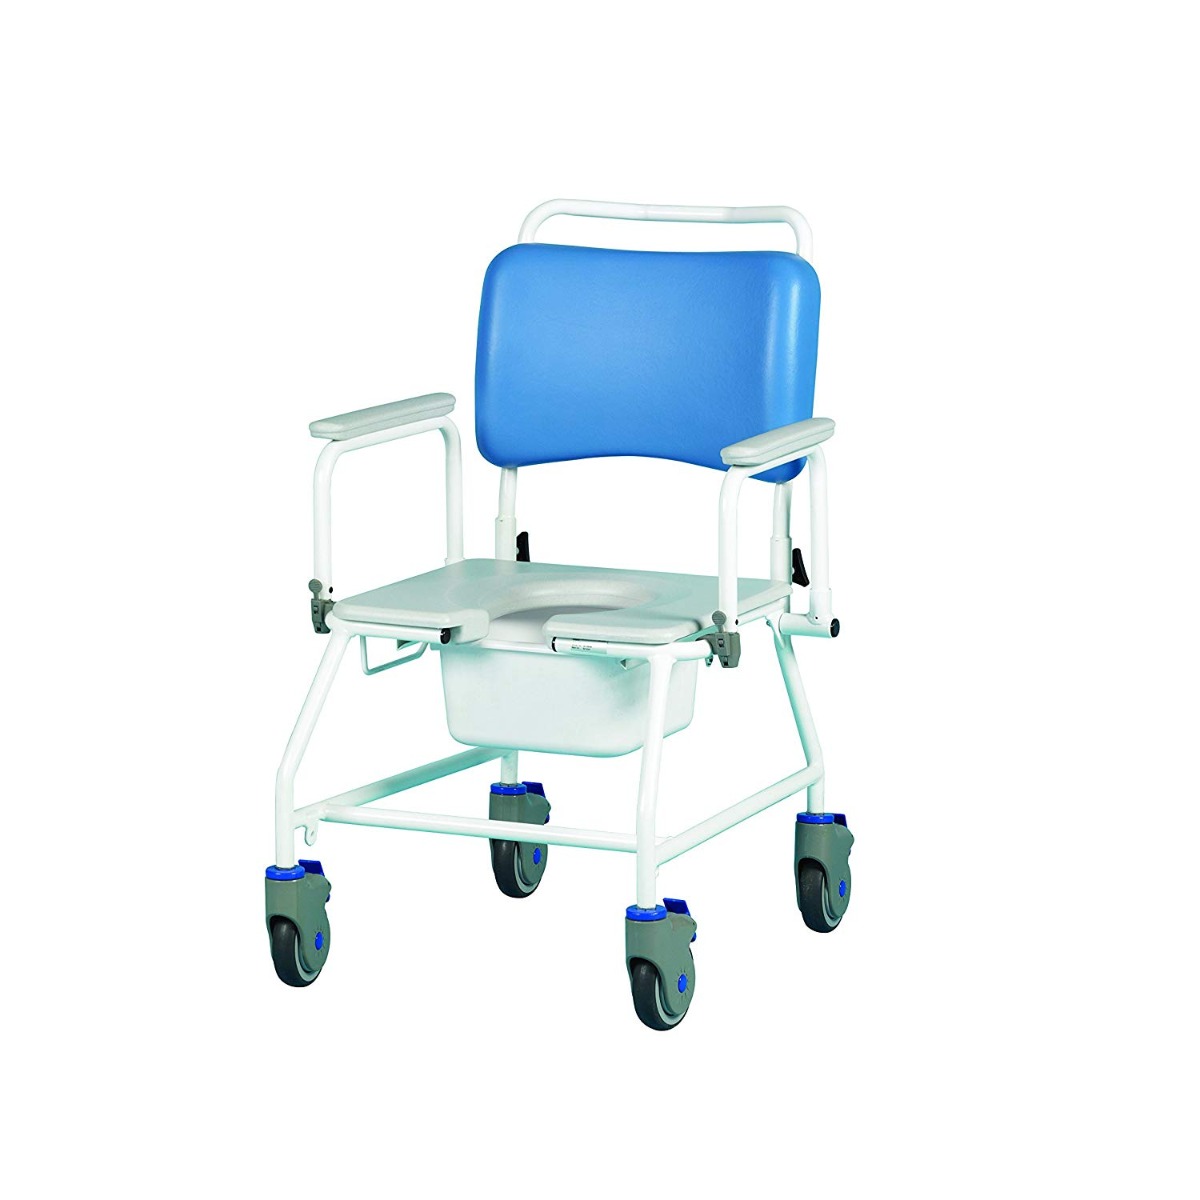 Atlantic Bariatric Commode Shower Chair